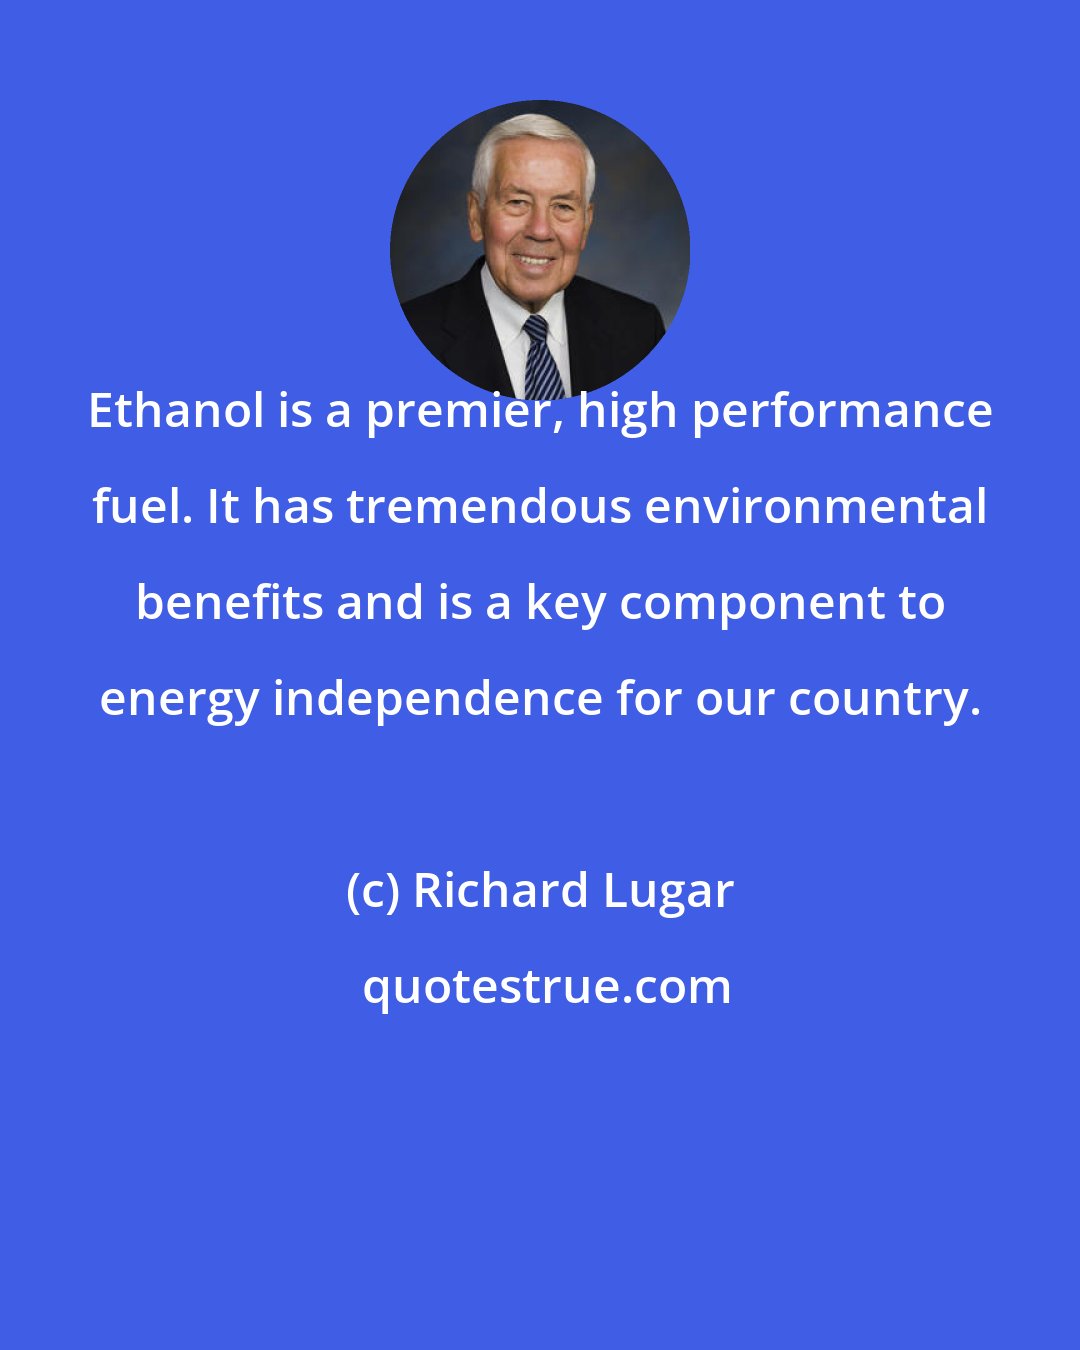 Richard Lugar: Ethanol is a premier, high performance fuel. It has tremendous environmental benefits and is a key component to energy independence for our country.